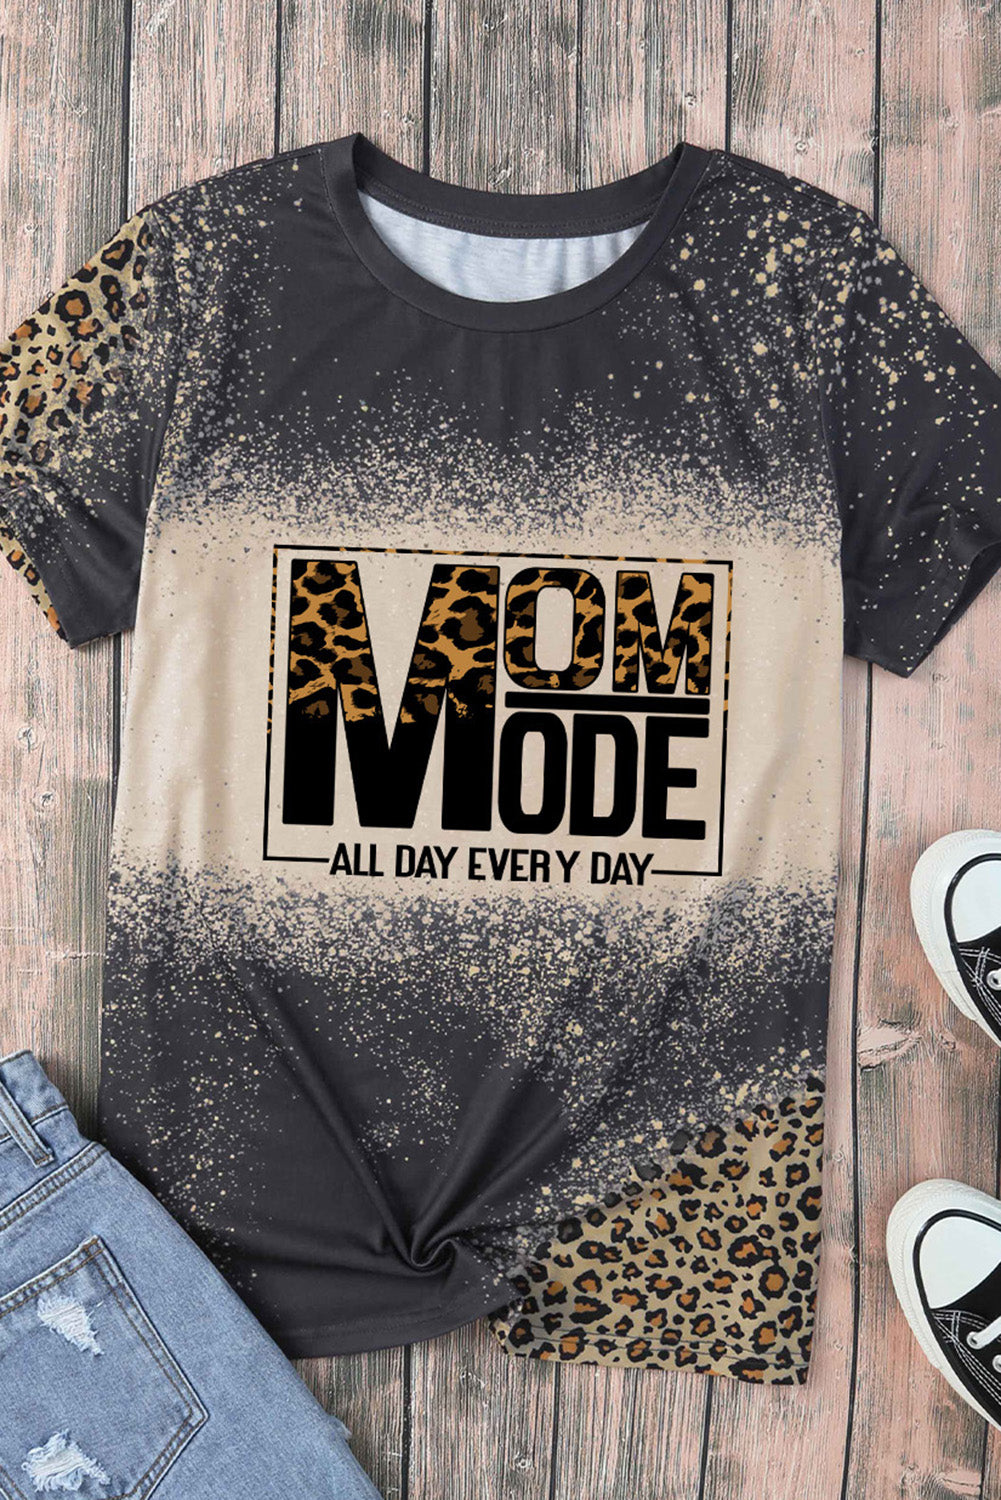 Graphic Leopard Round Neck Tee Shirt - Kawaii Stop - Casual Chic, Comfortable, DTG Graphic, Everyday Wear, Fashion Statement, Leopard Graphic Tee, Machine Wash, No Sheer, Polyester Tee, Round Neck, Ship From Overseas, Short Sleeves, Slight Stretch, Spandex Blend, SYNZ, T-Shirt, T-Shirts, Tee, Tumble Dry, Wardrobe Upgrade, Women's Clothing, Women's Top